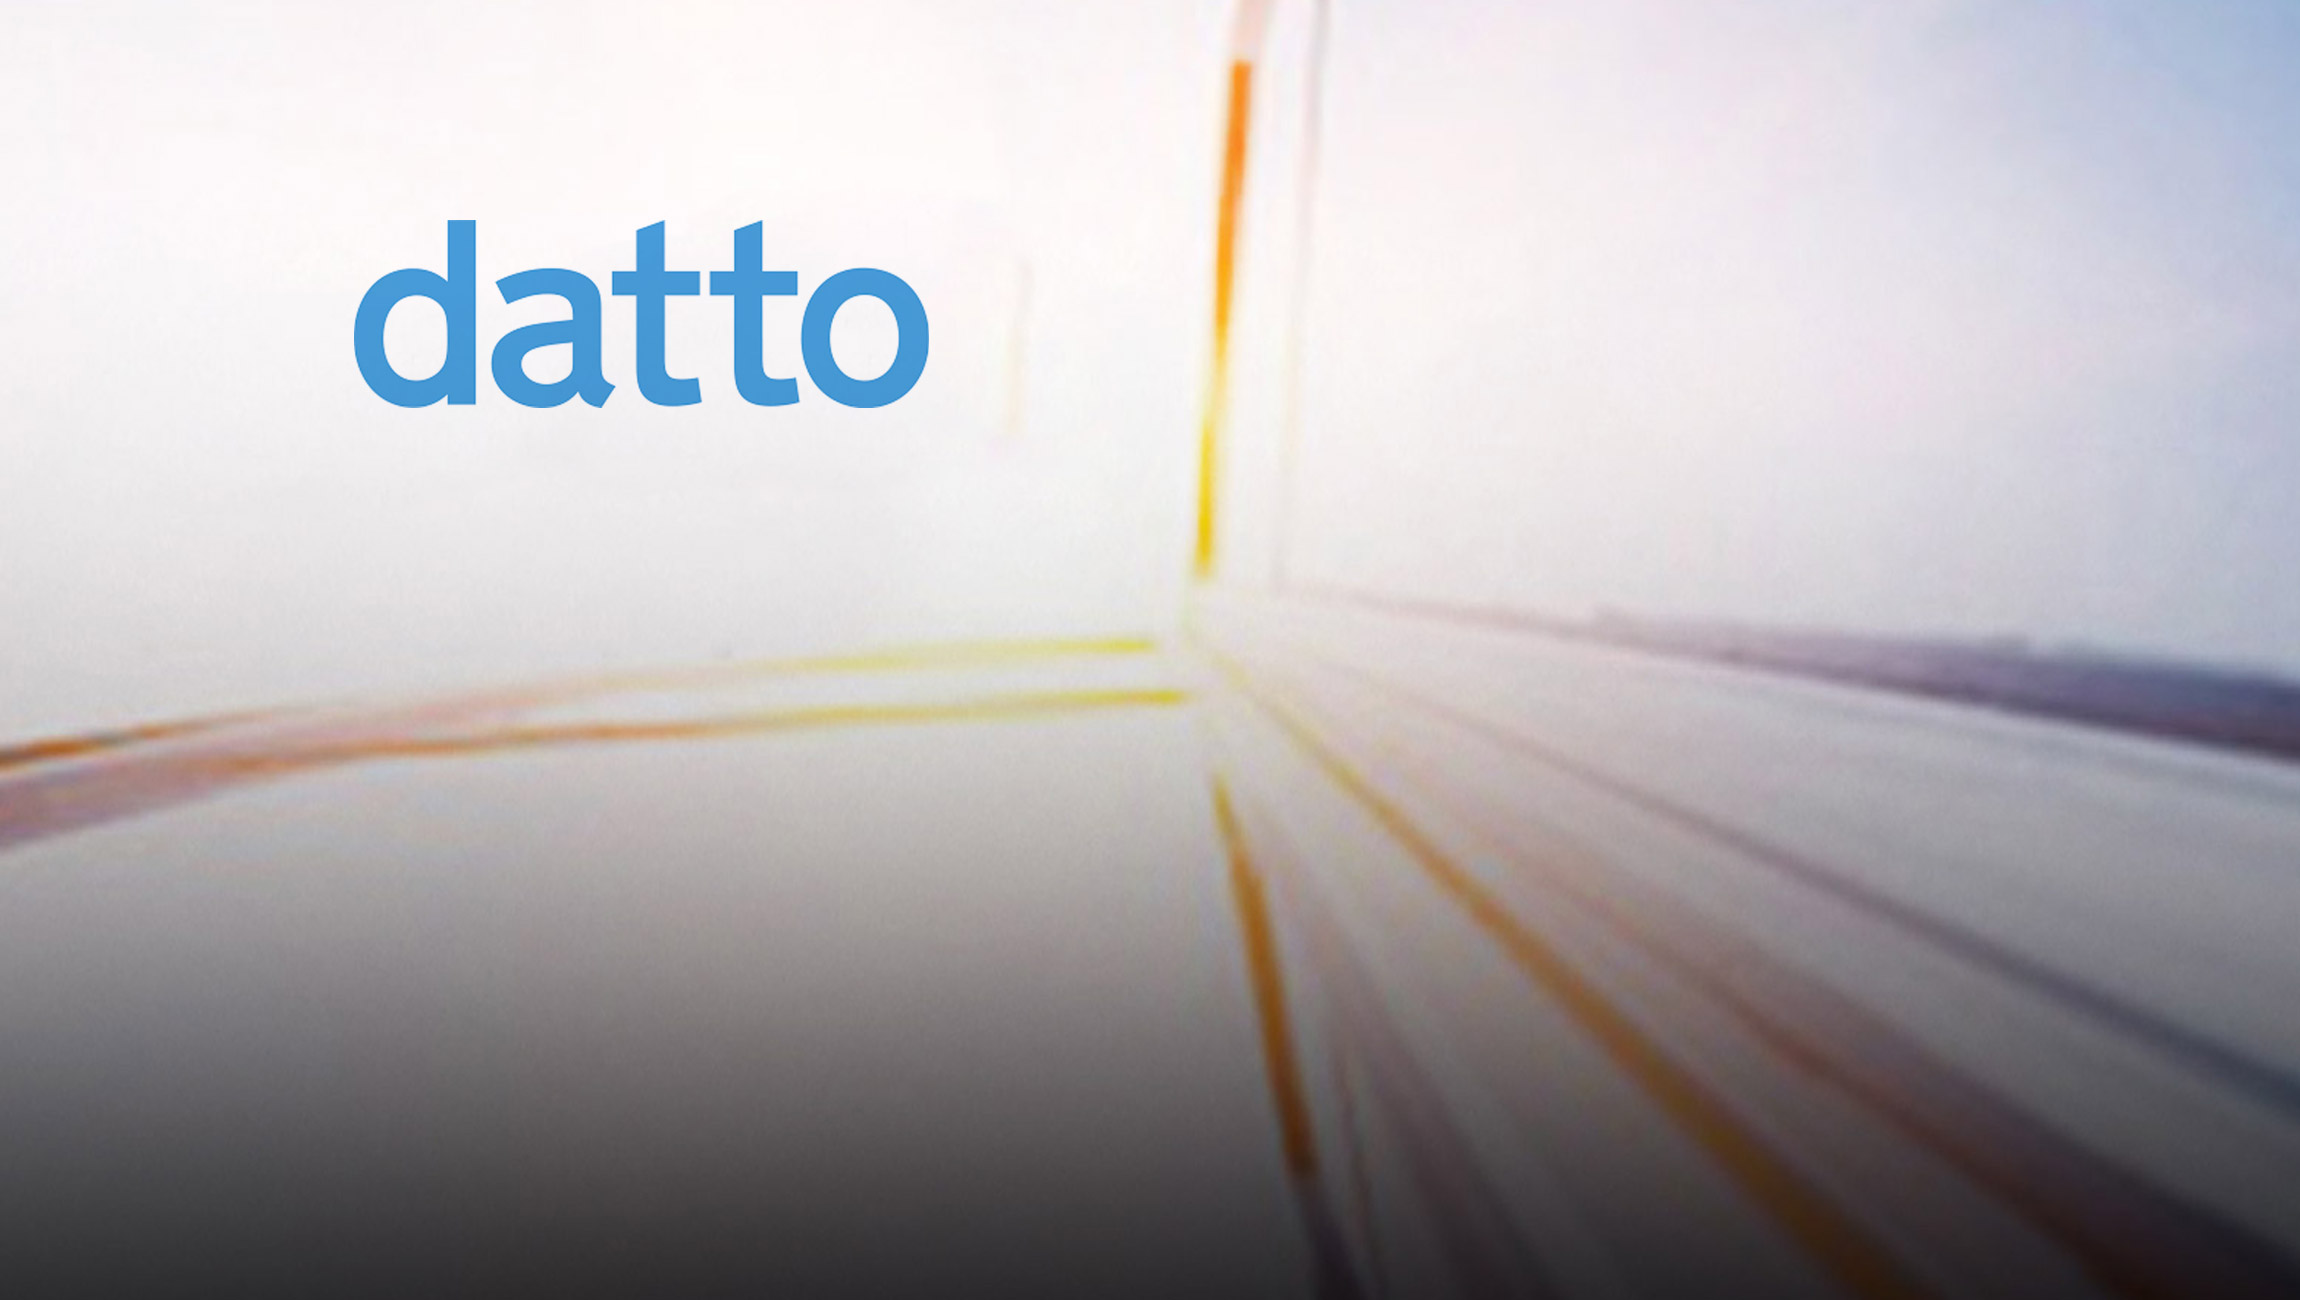 Datto Leaders Named to CRN’s 2022 Women of the Channel and Power 100 Lists